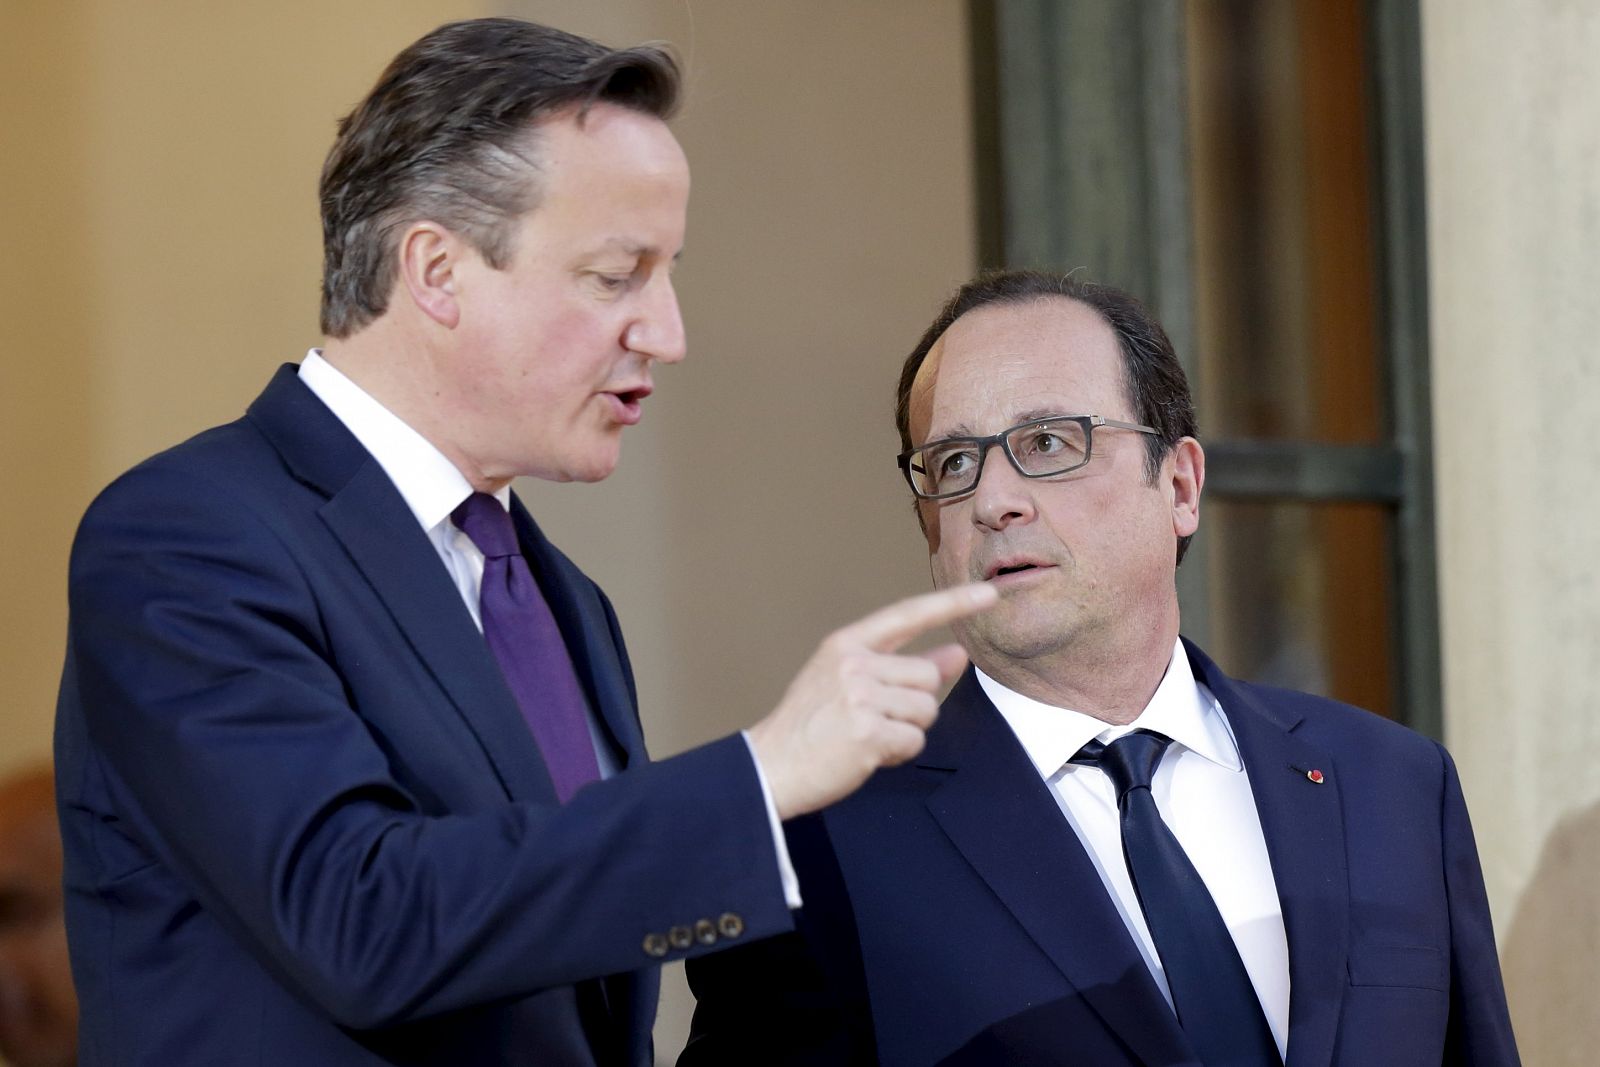 French President Hollande accompanies Britain's Prime Minister Cameron as he leaves the Elysee Palace after a meeting in Paris